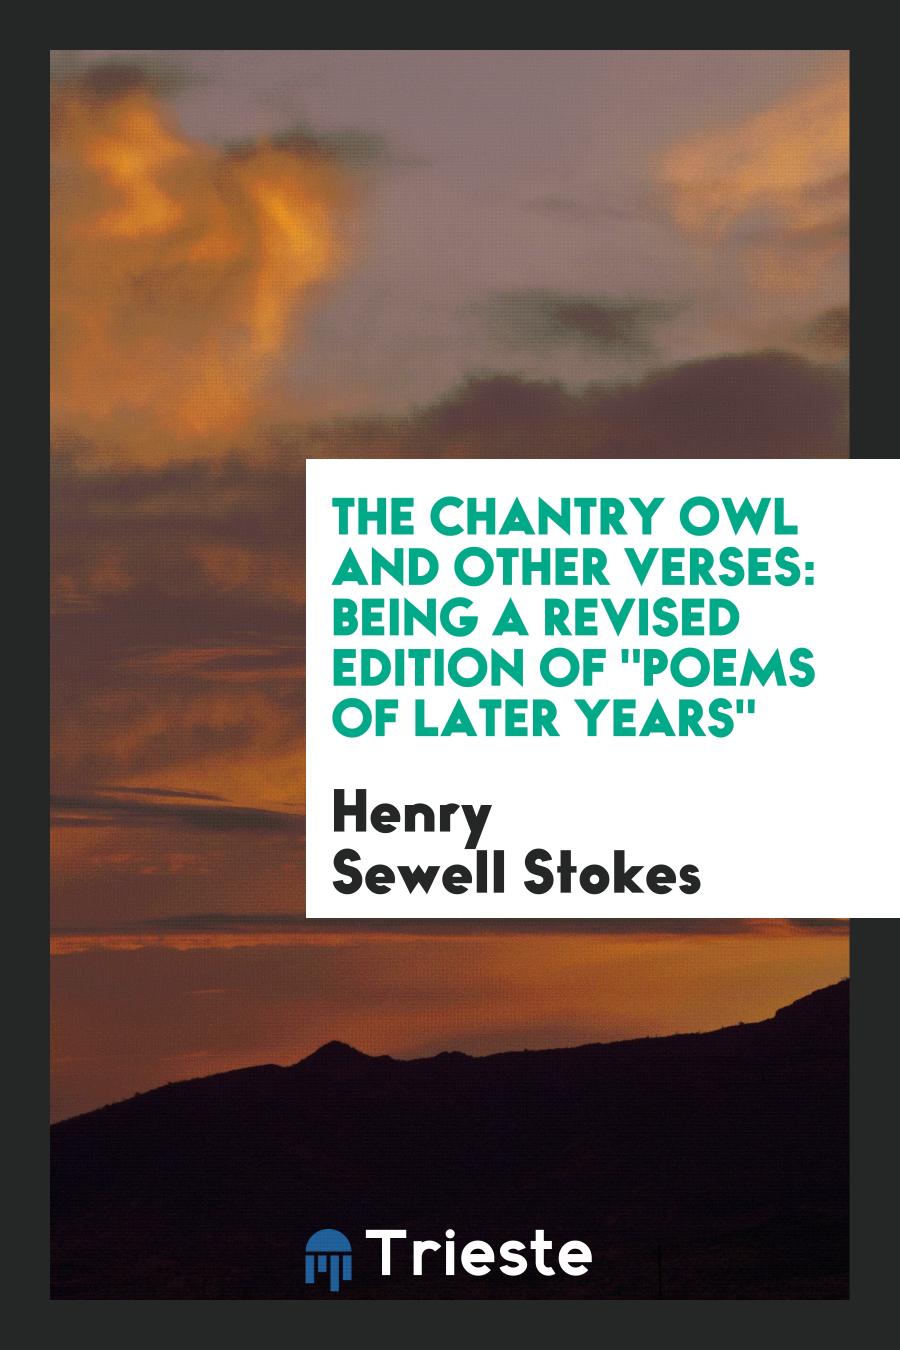 The Chantry Owl and Other Verses: Being a Revised Edition of "Poems of Later Years"